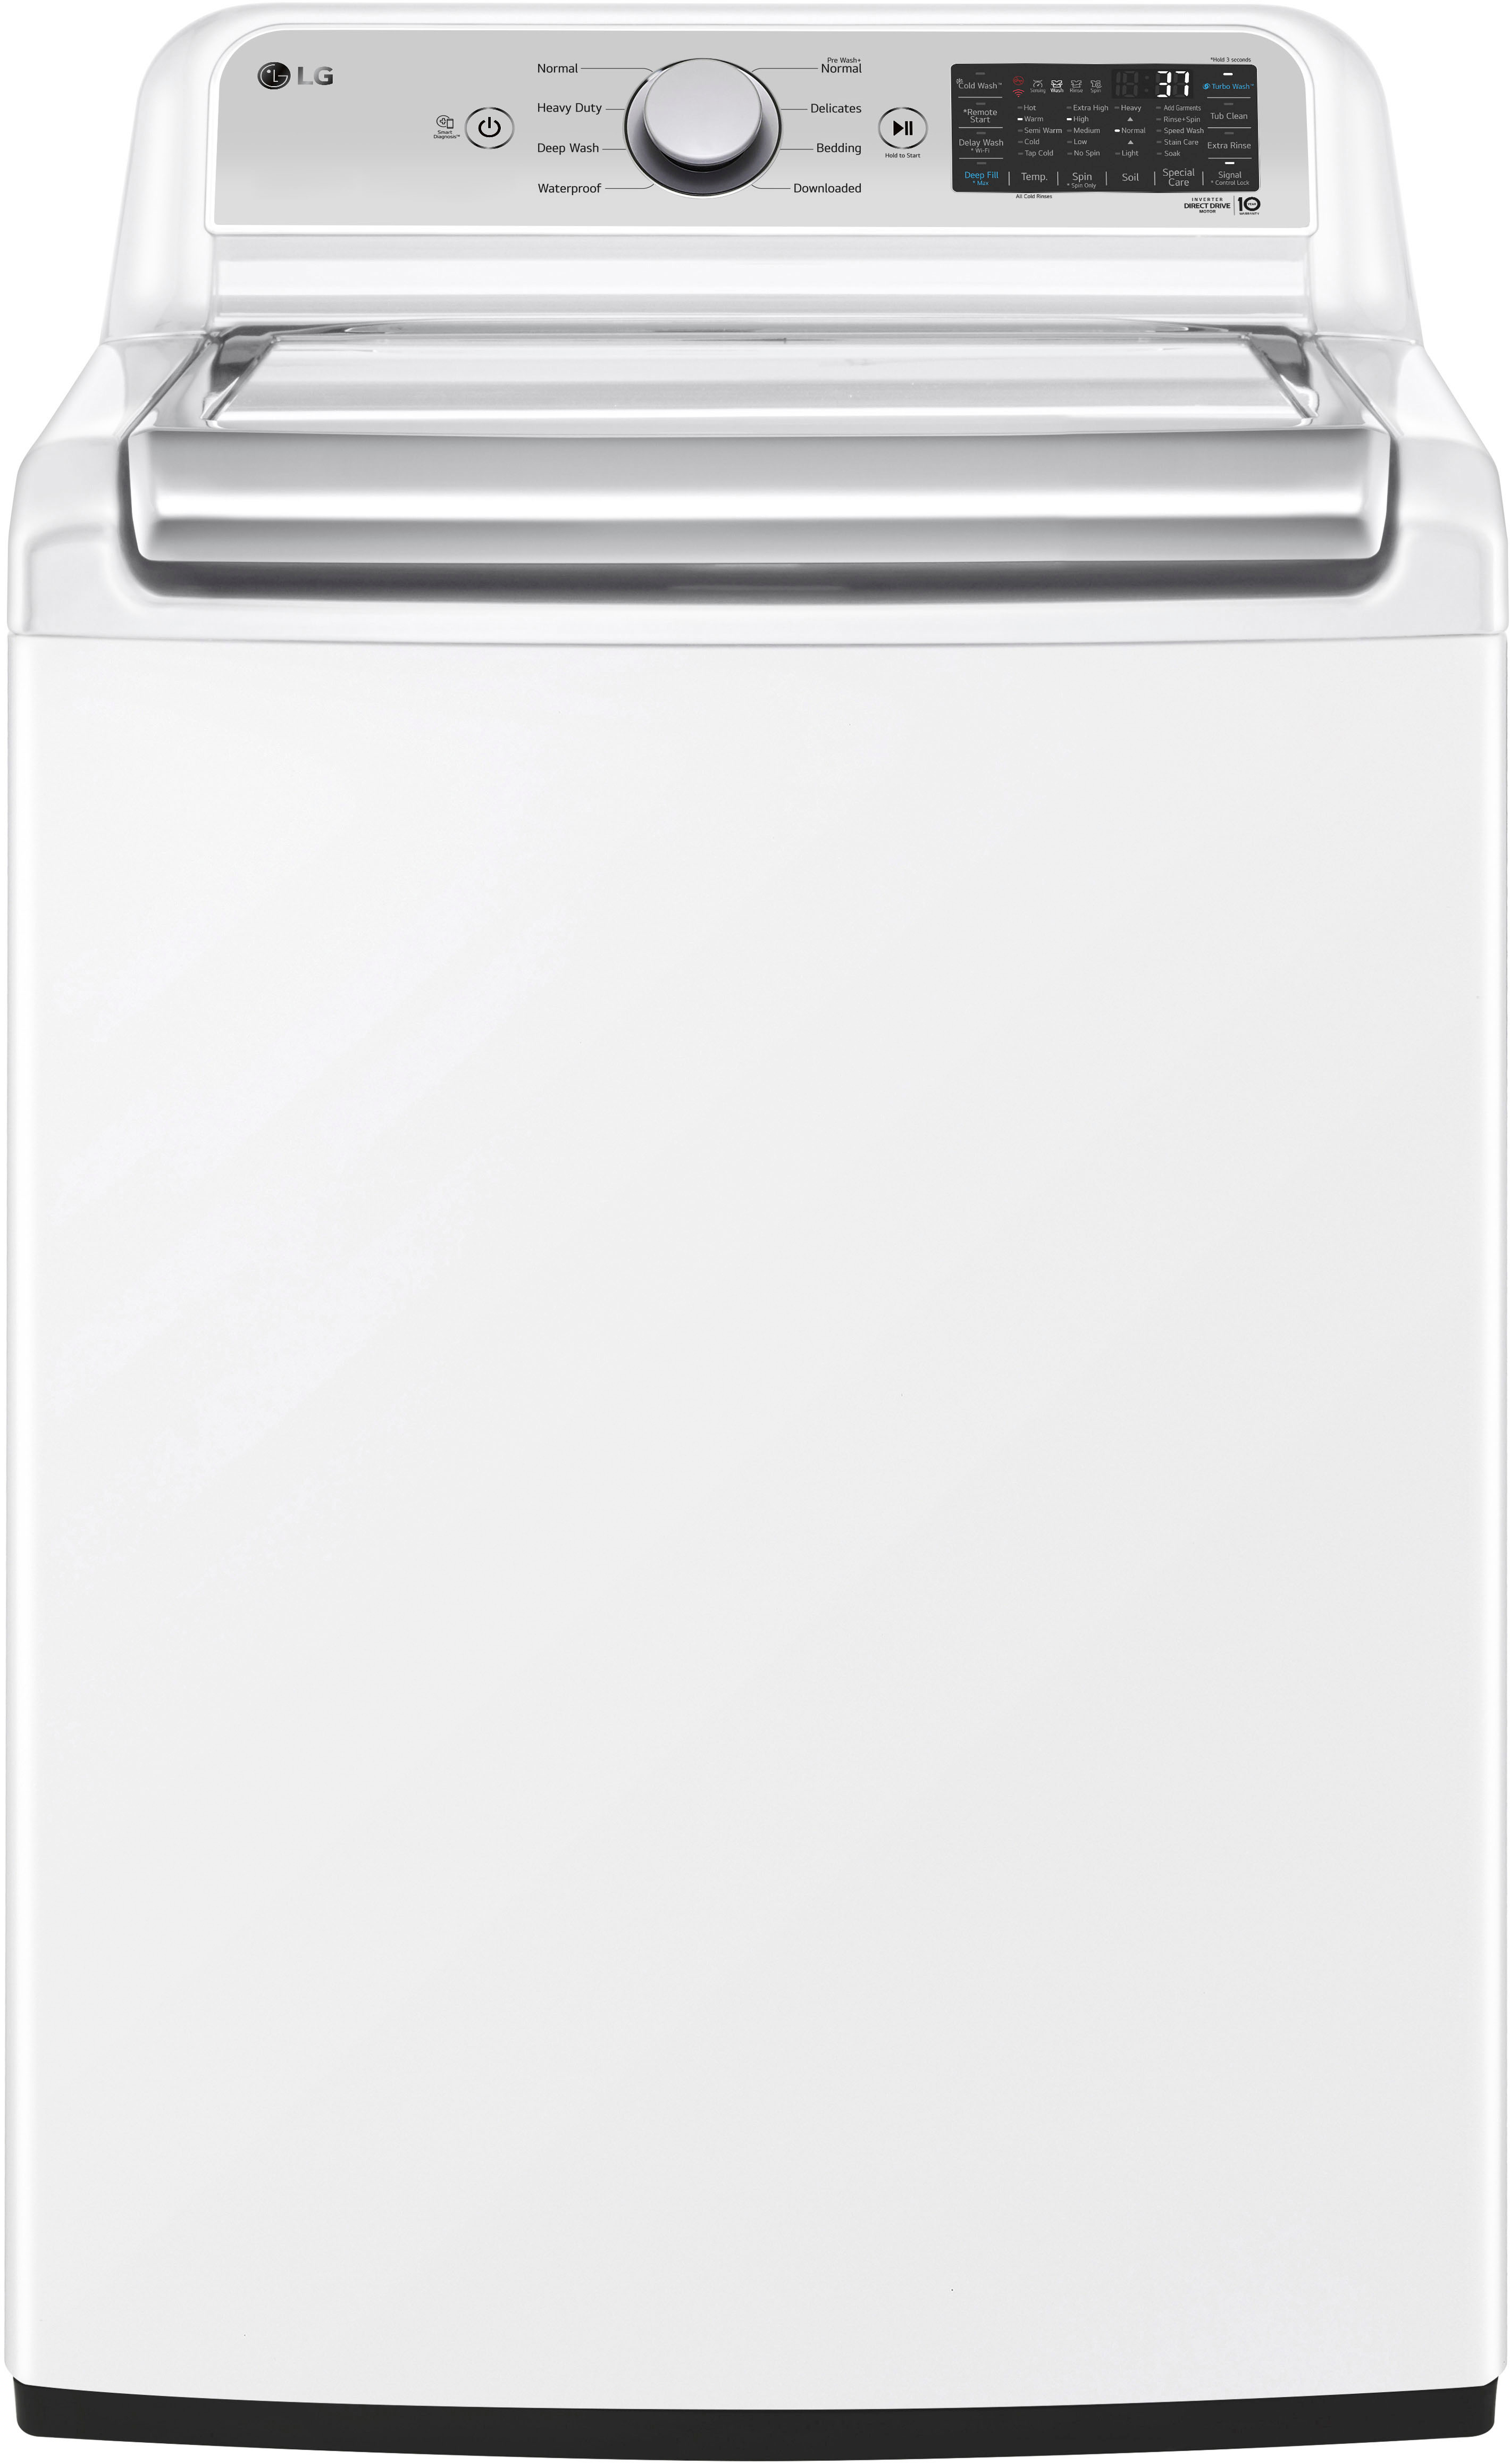 LG 5.3 Cu. Ft. High-Efficiency Smart Top Washer with 4-Way Agitator and TurboWash3D White WT7405CW Best Buy